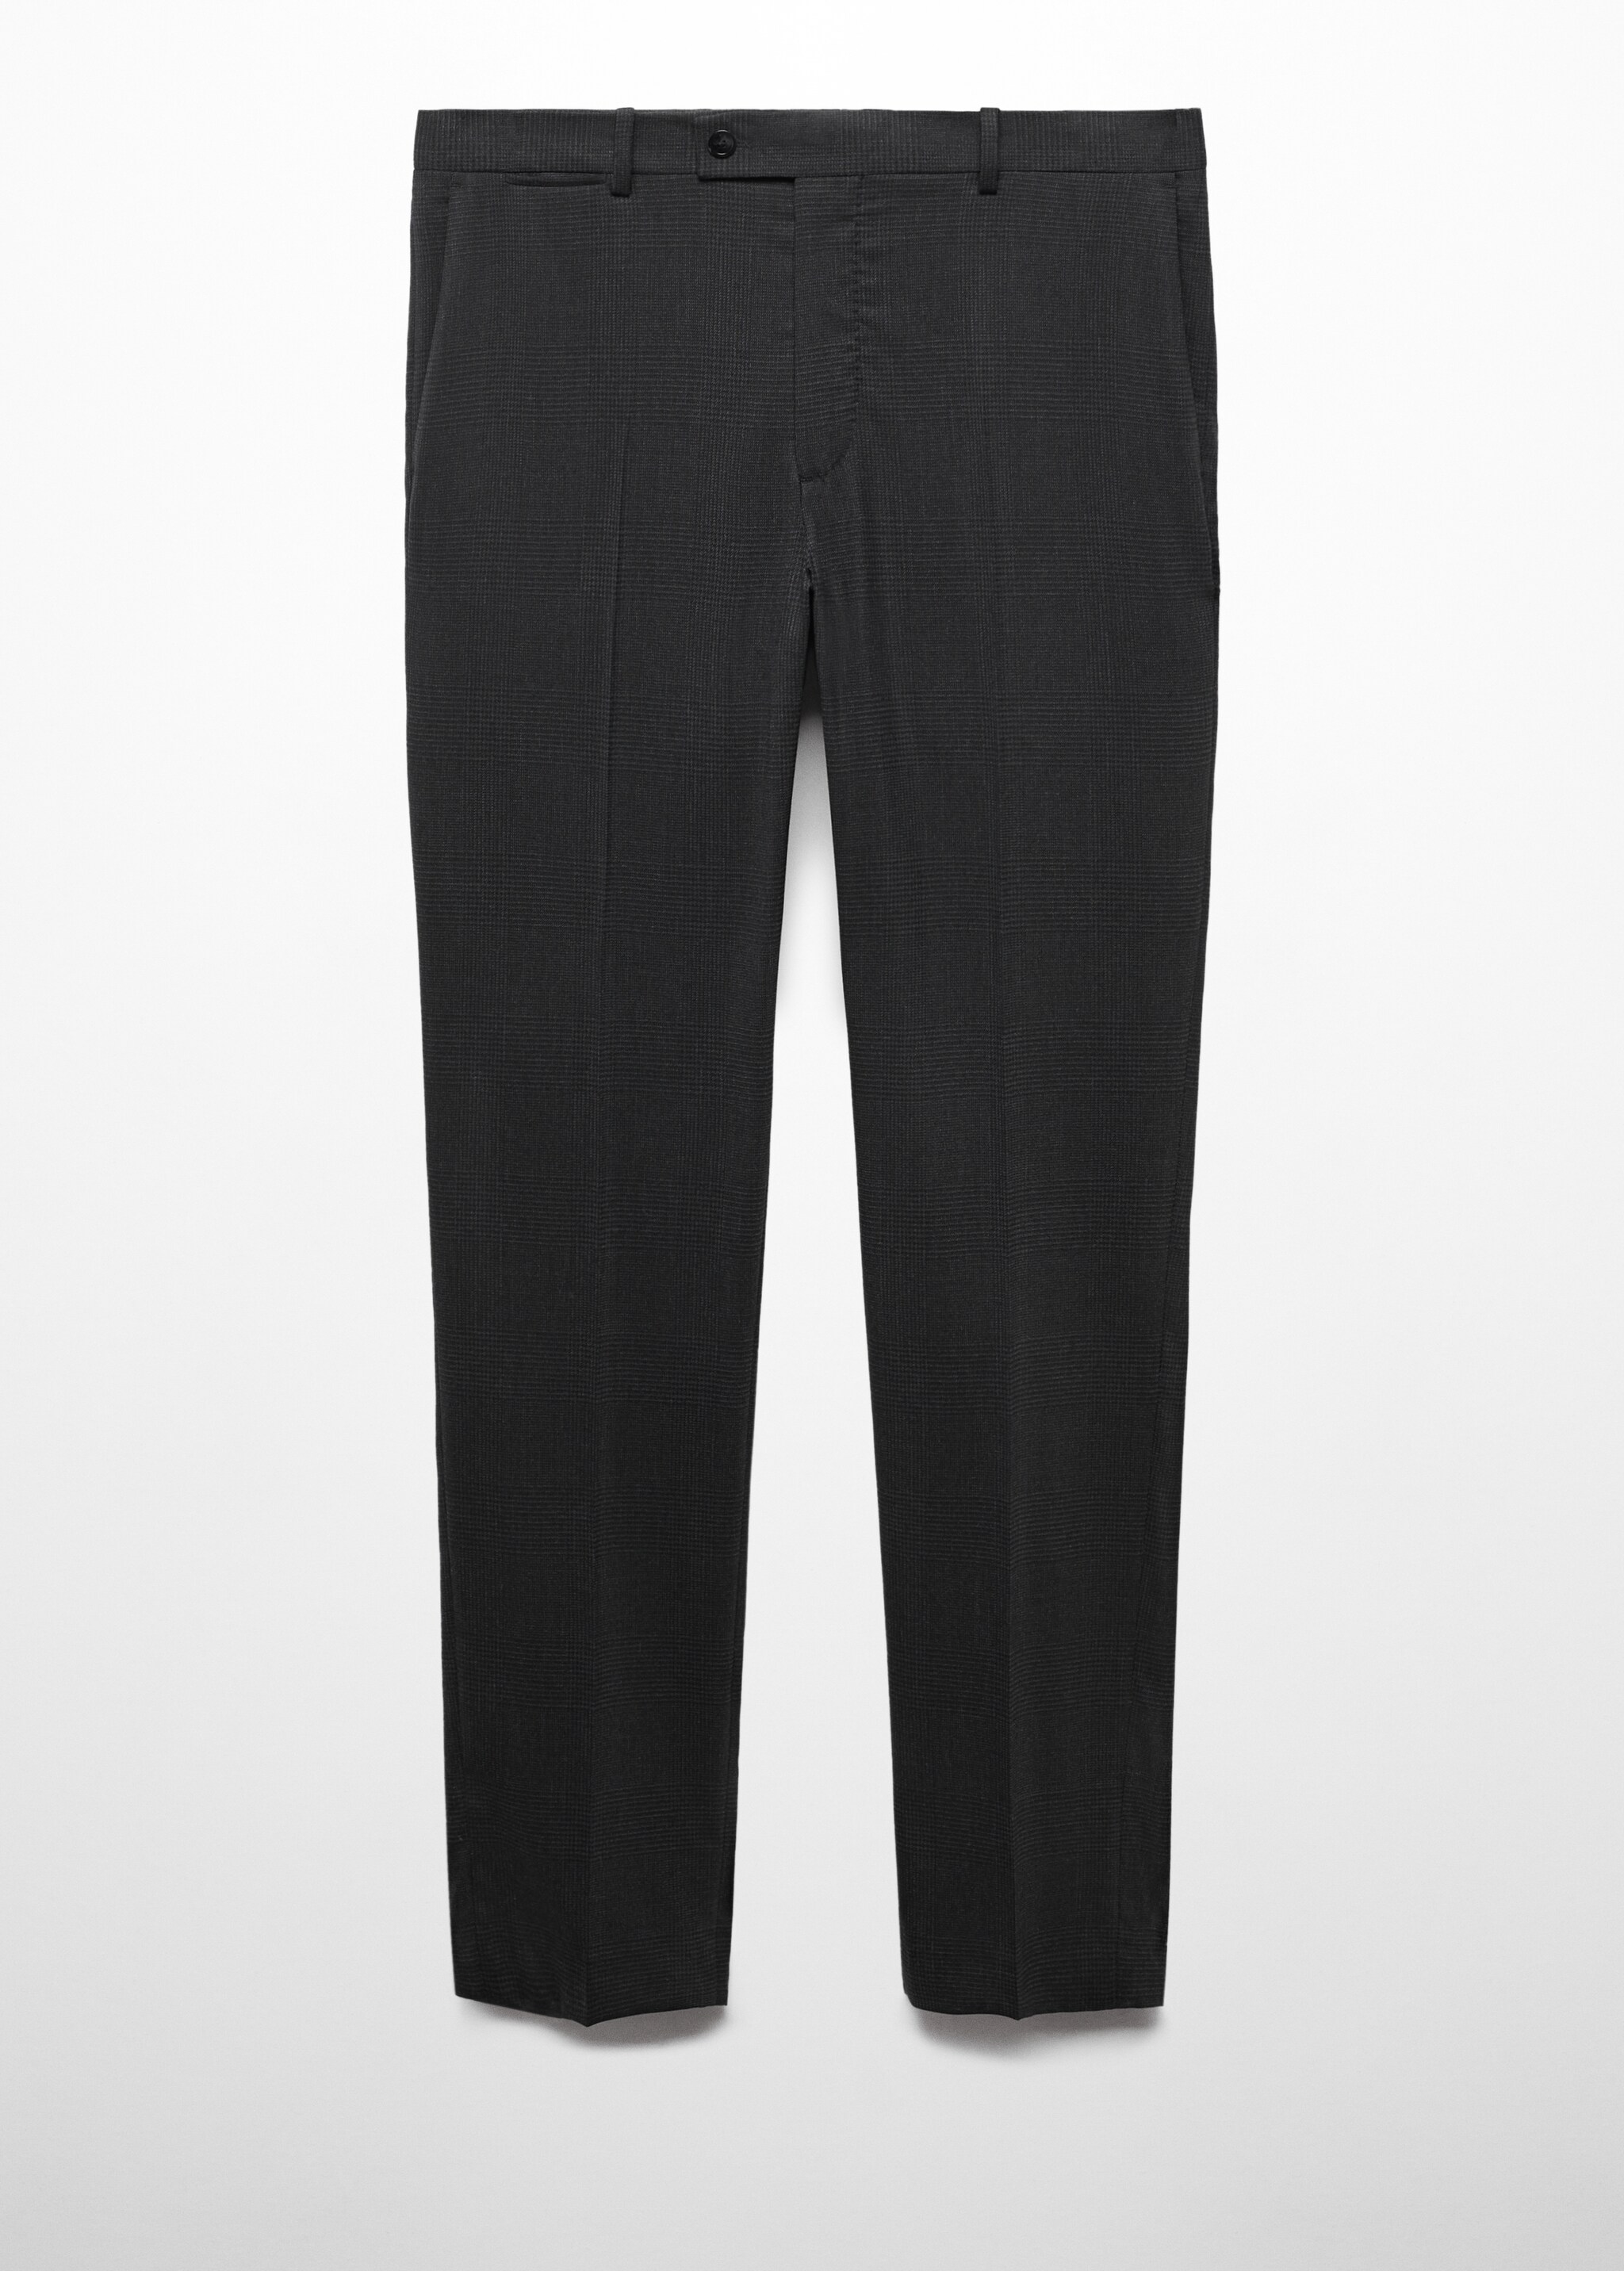 Slim fit cool wool suit pants - Article without model